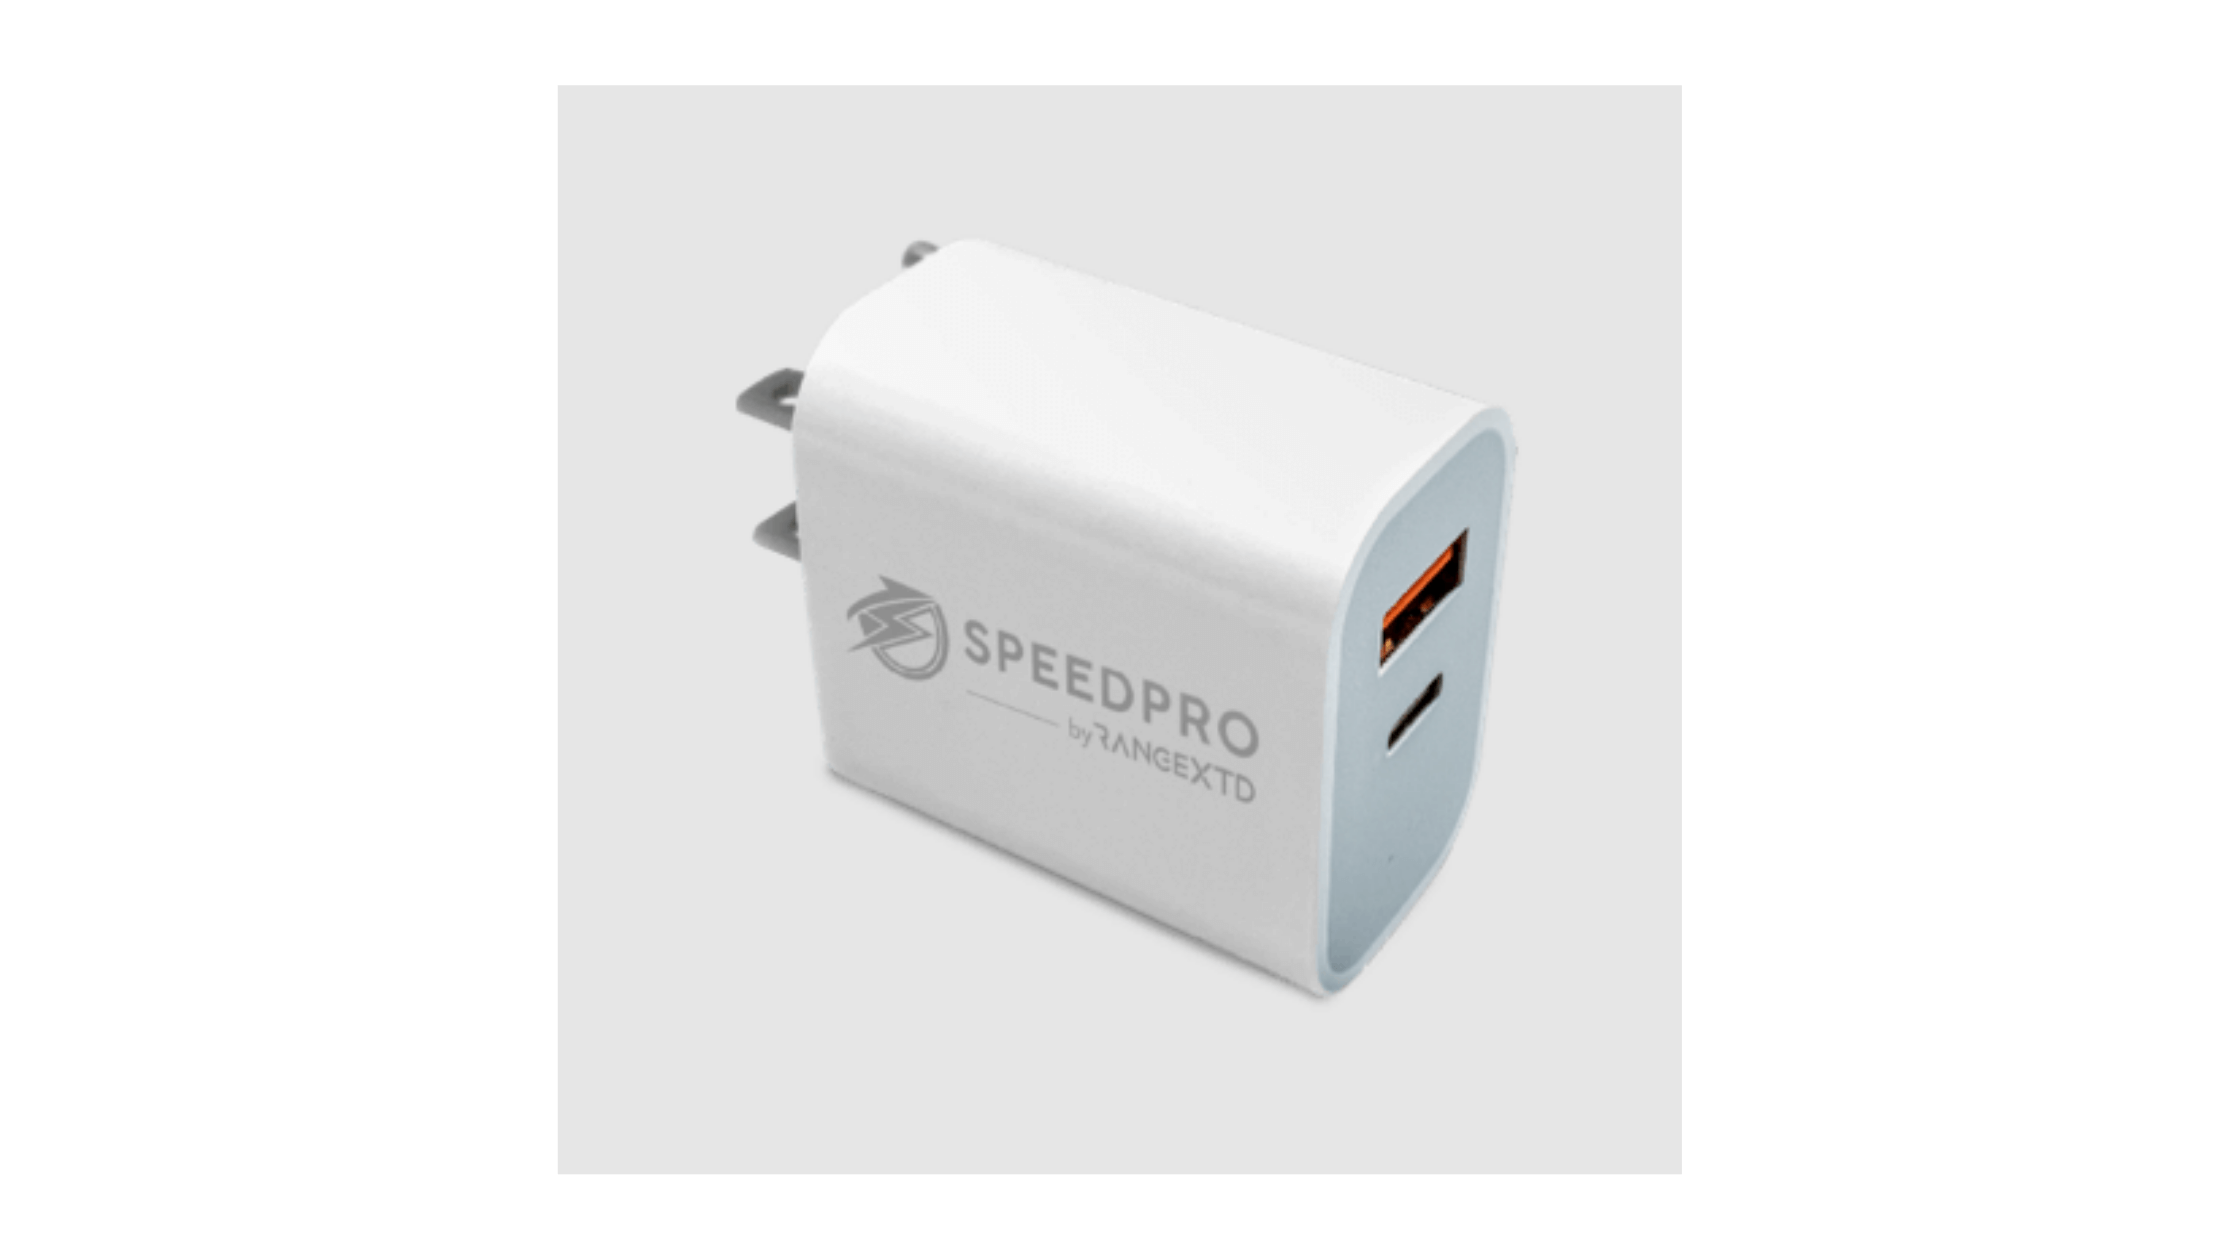  SpeedPro Charger Reviews